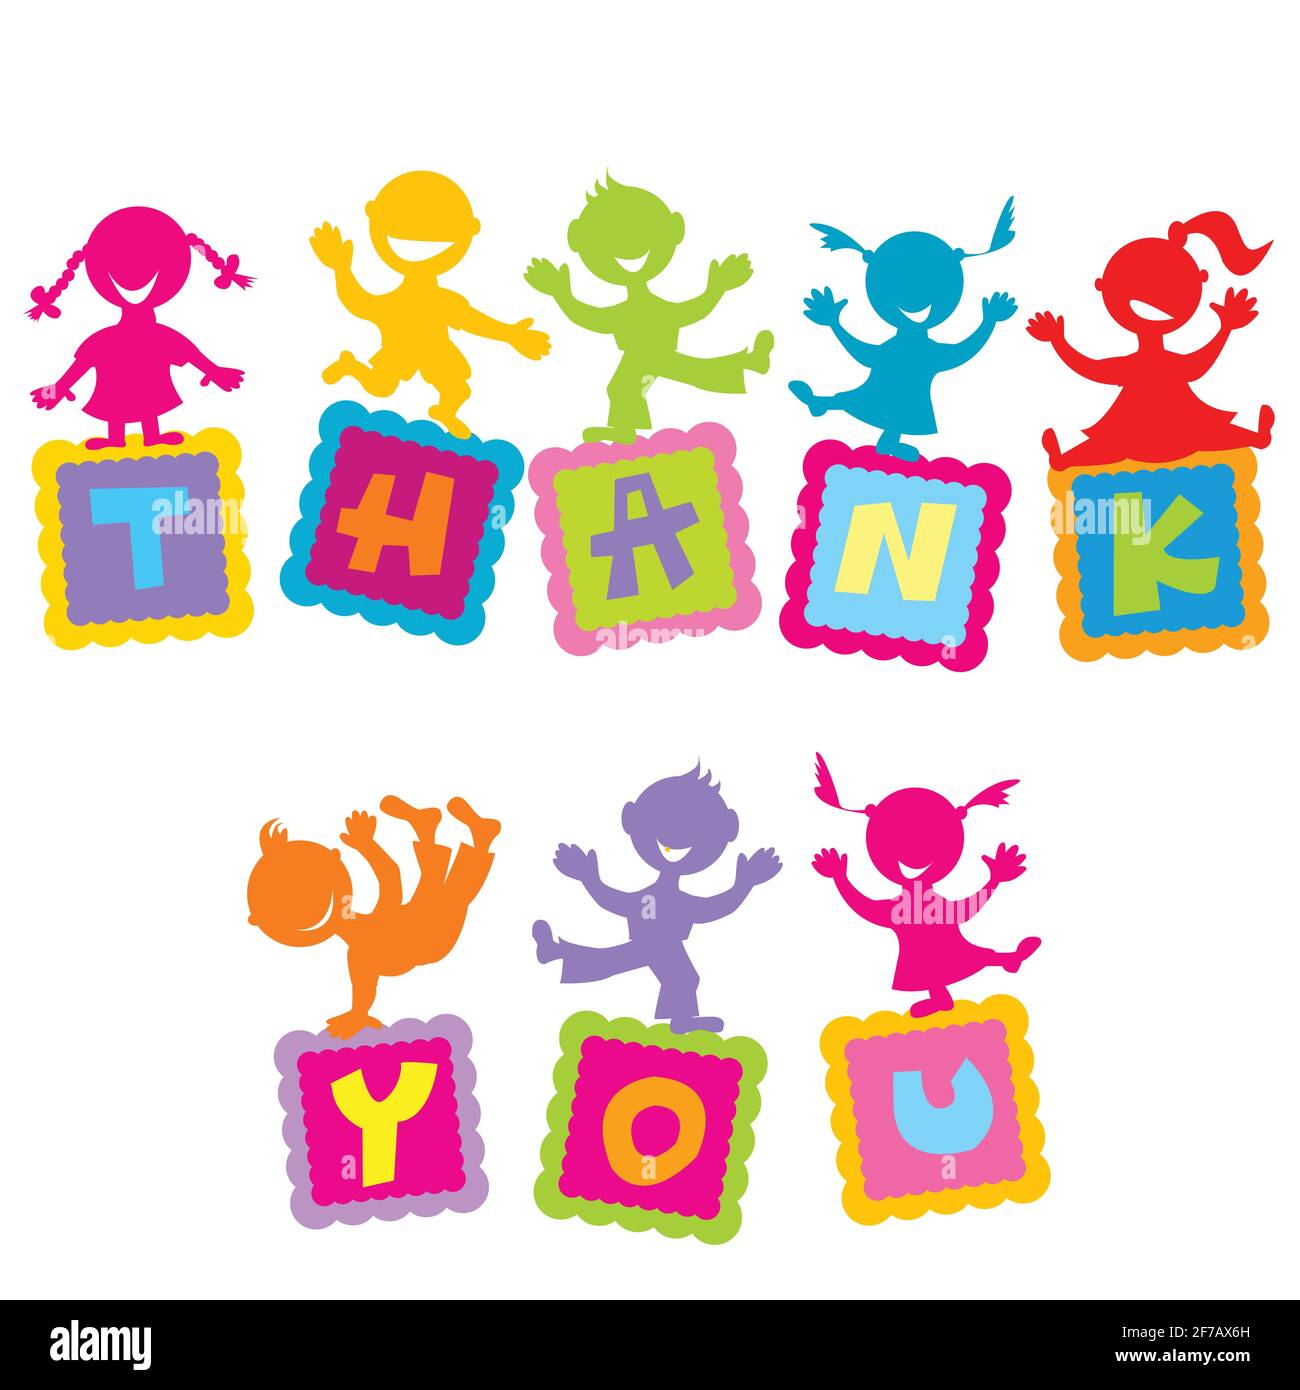 Thank you card with cartoon colored kids Stock Vector